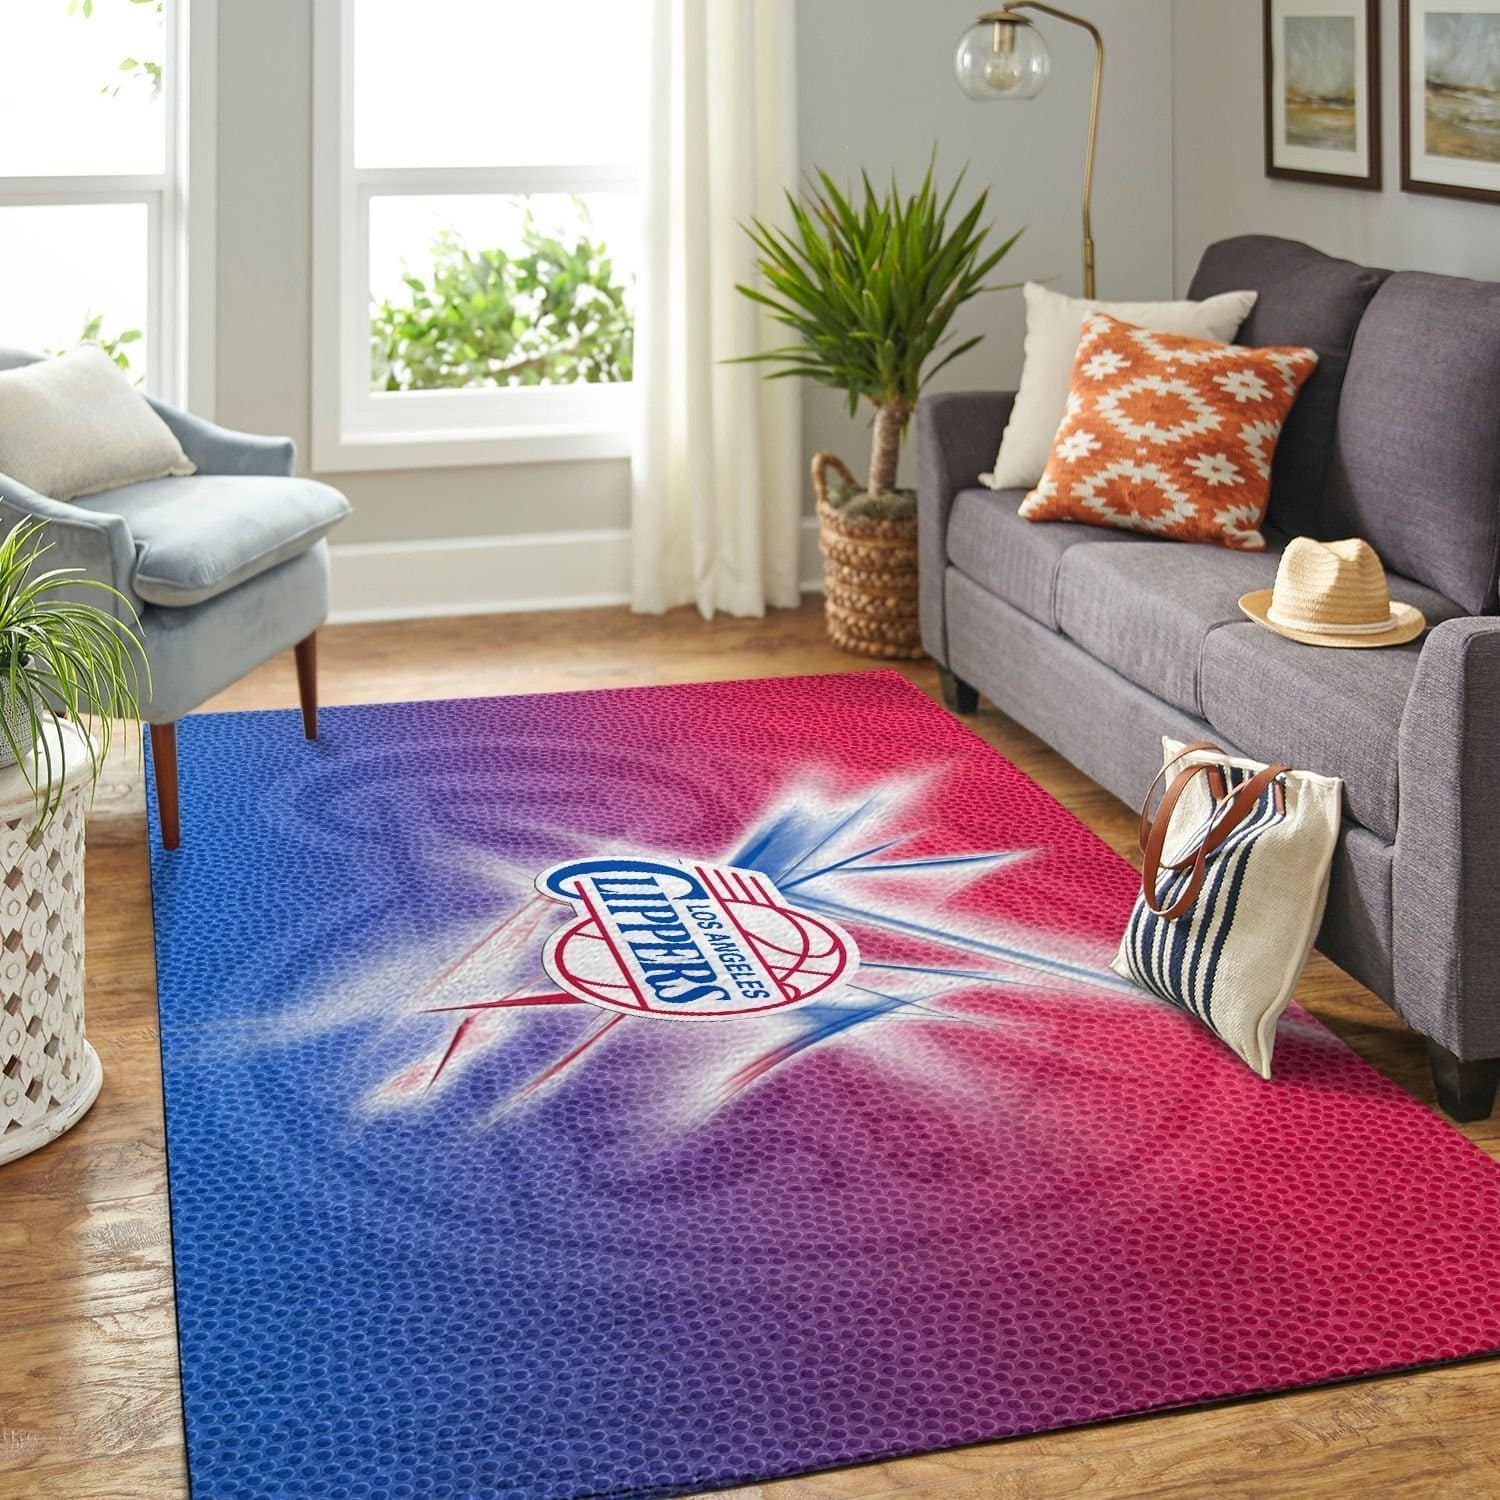 Amazon Los Angeles Clippers Living Room Area No3556 Rug